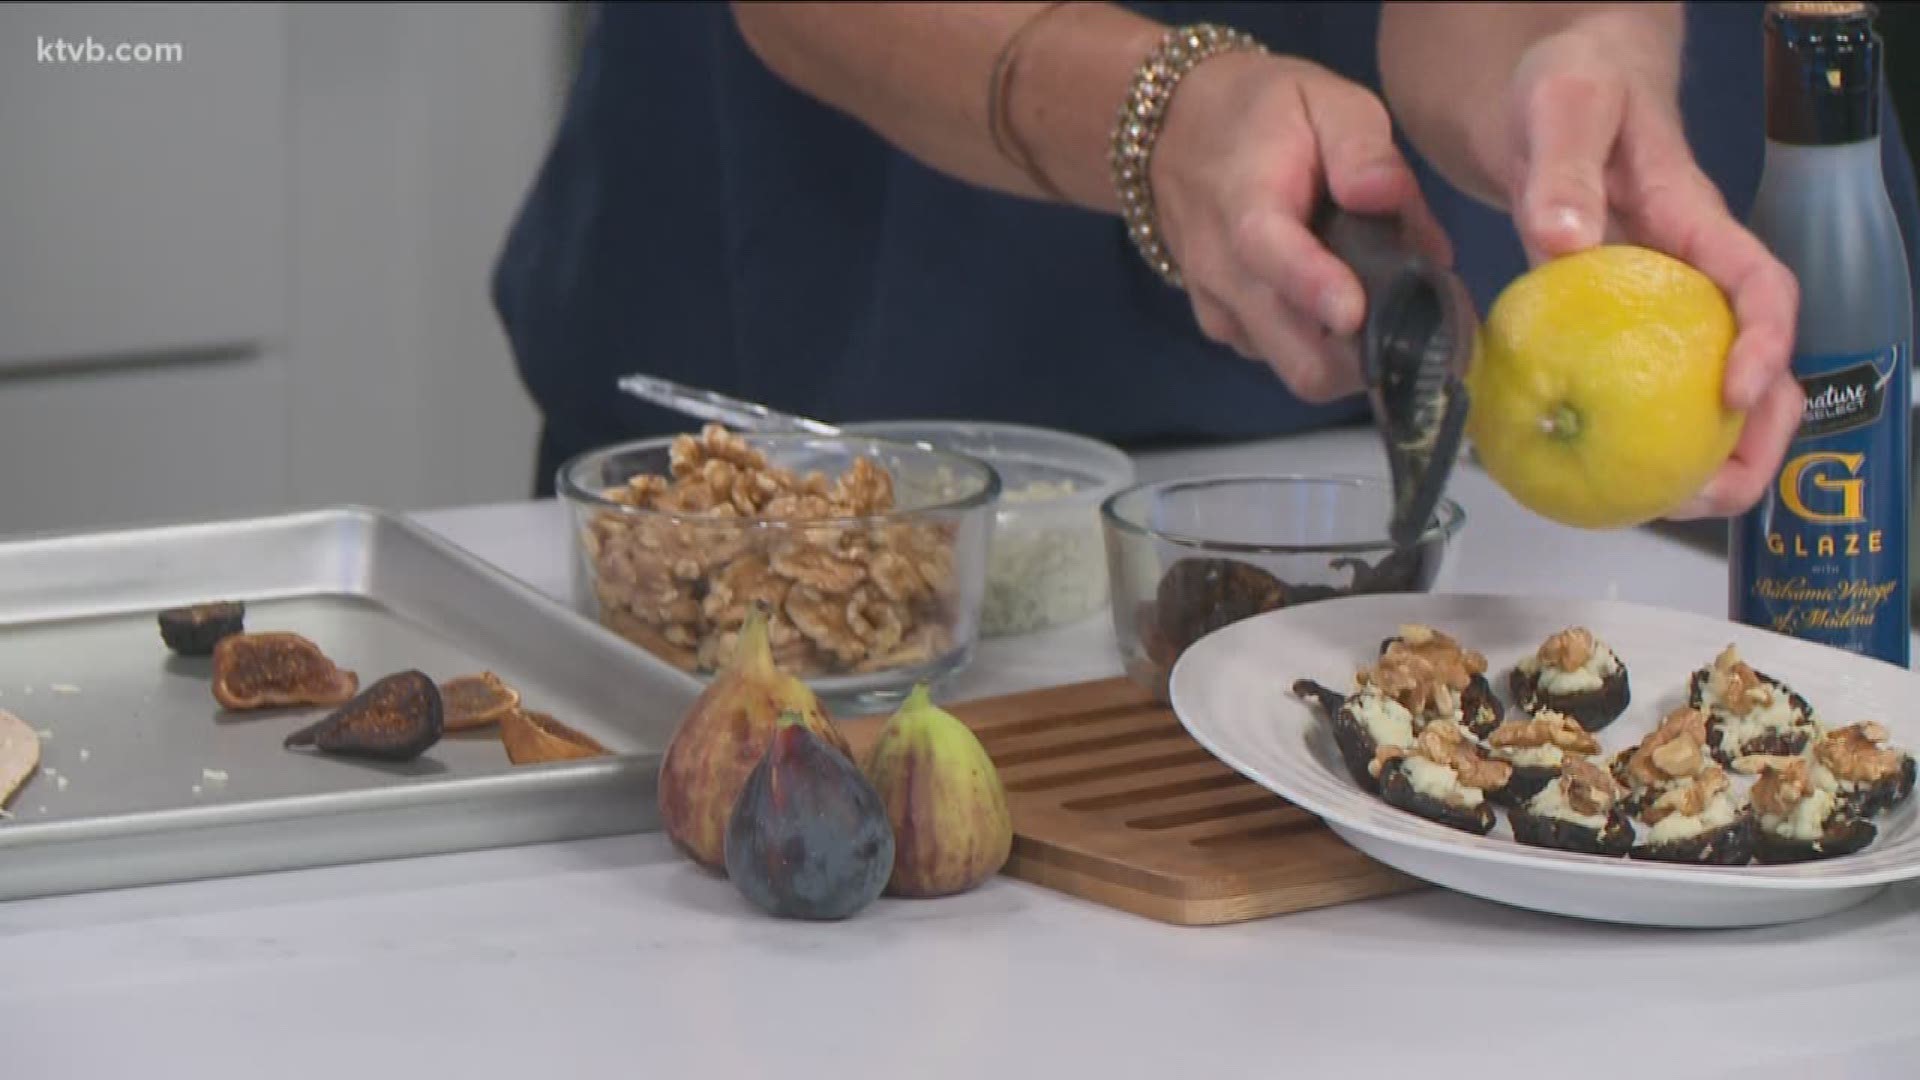 Albertsons dietitian Molly Tevis says figs are in season right now. She shows us two easy, healthy recipes made with figs.